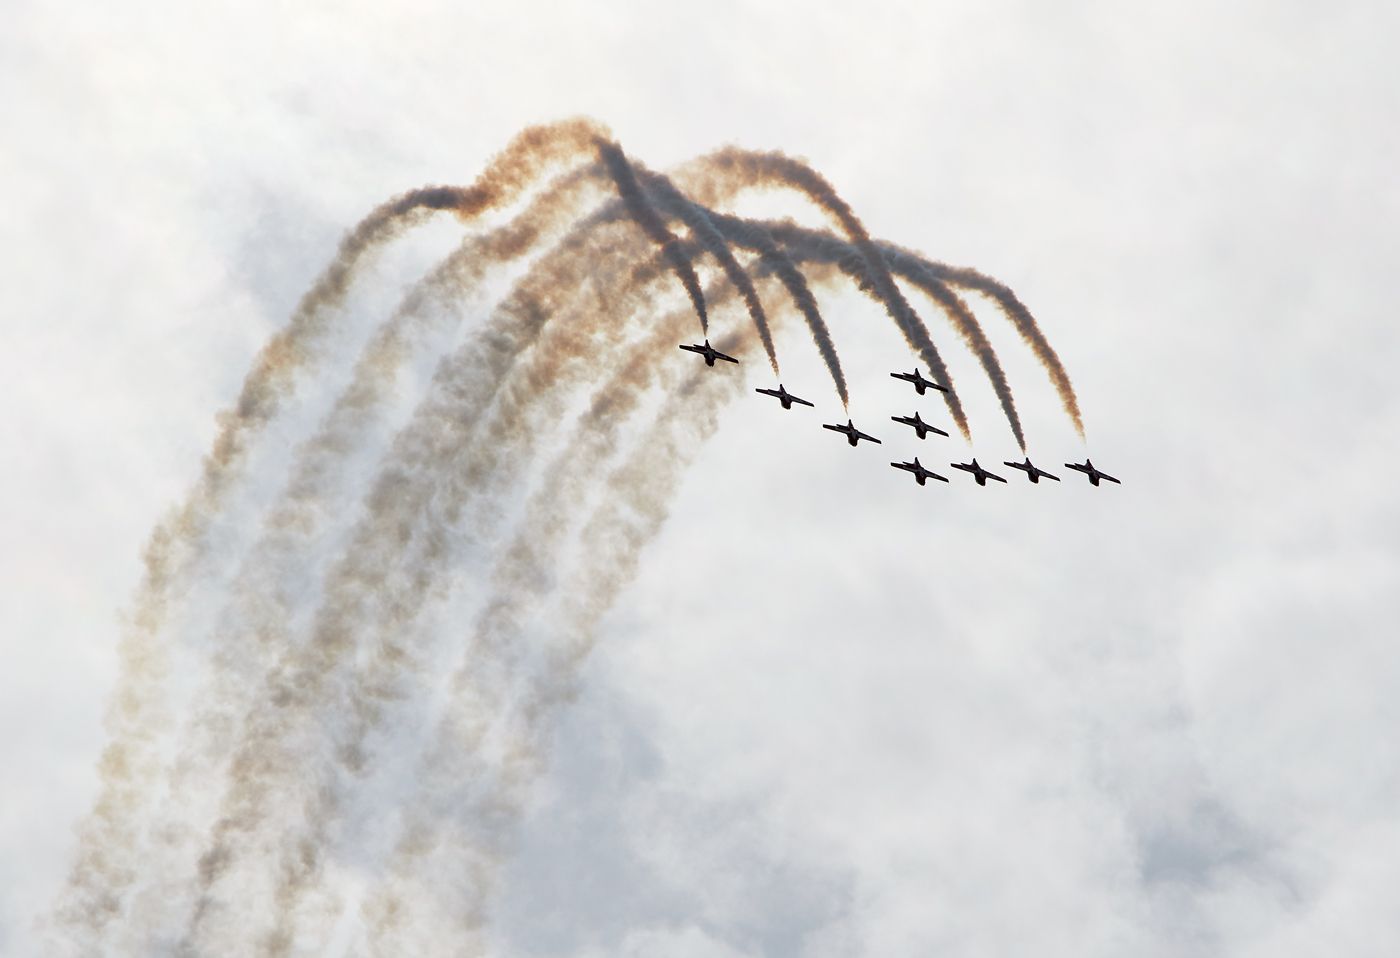 Canadian Forces Snowbirds Team at the Springbank Airshow